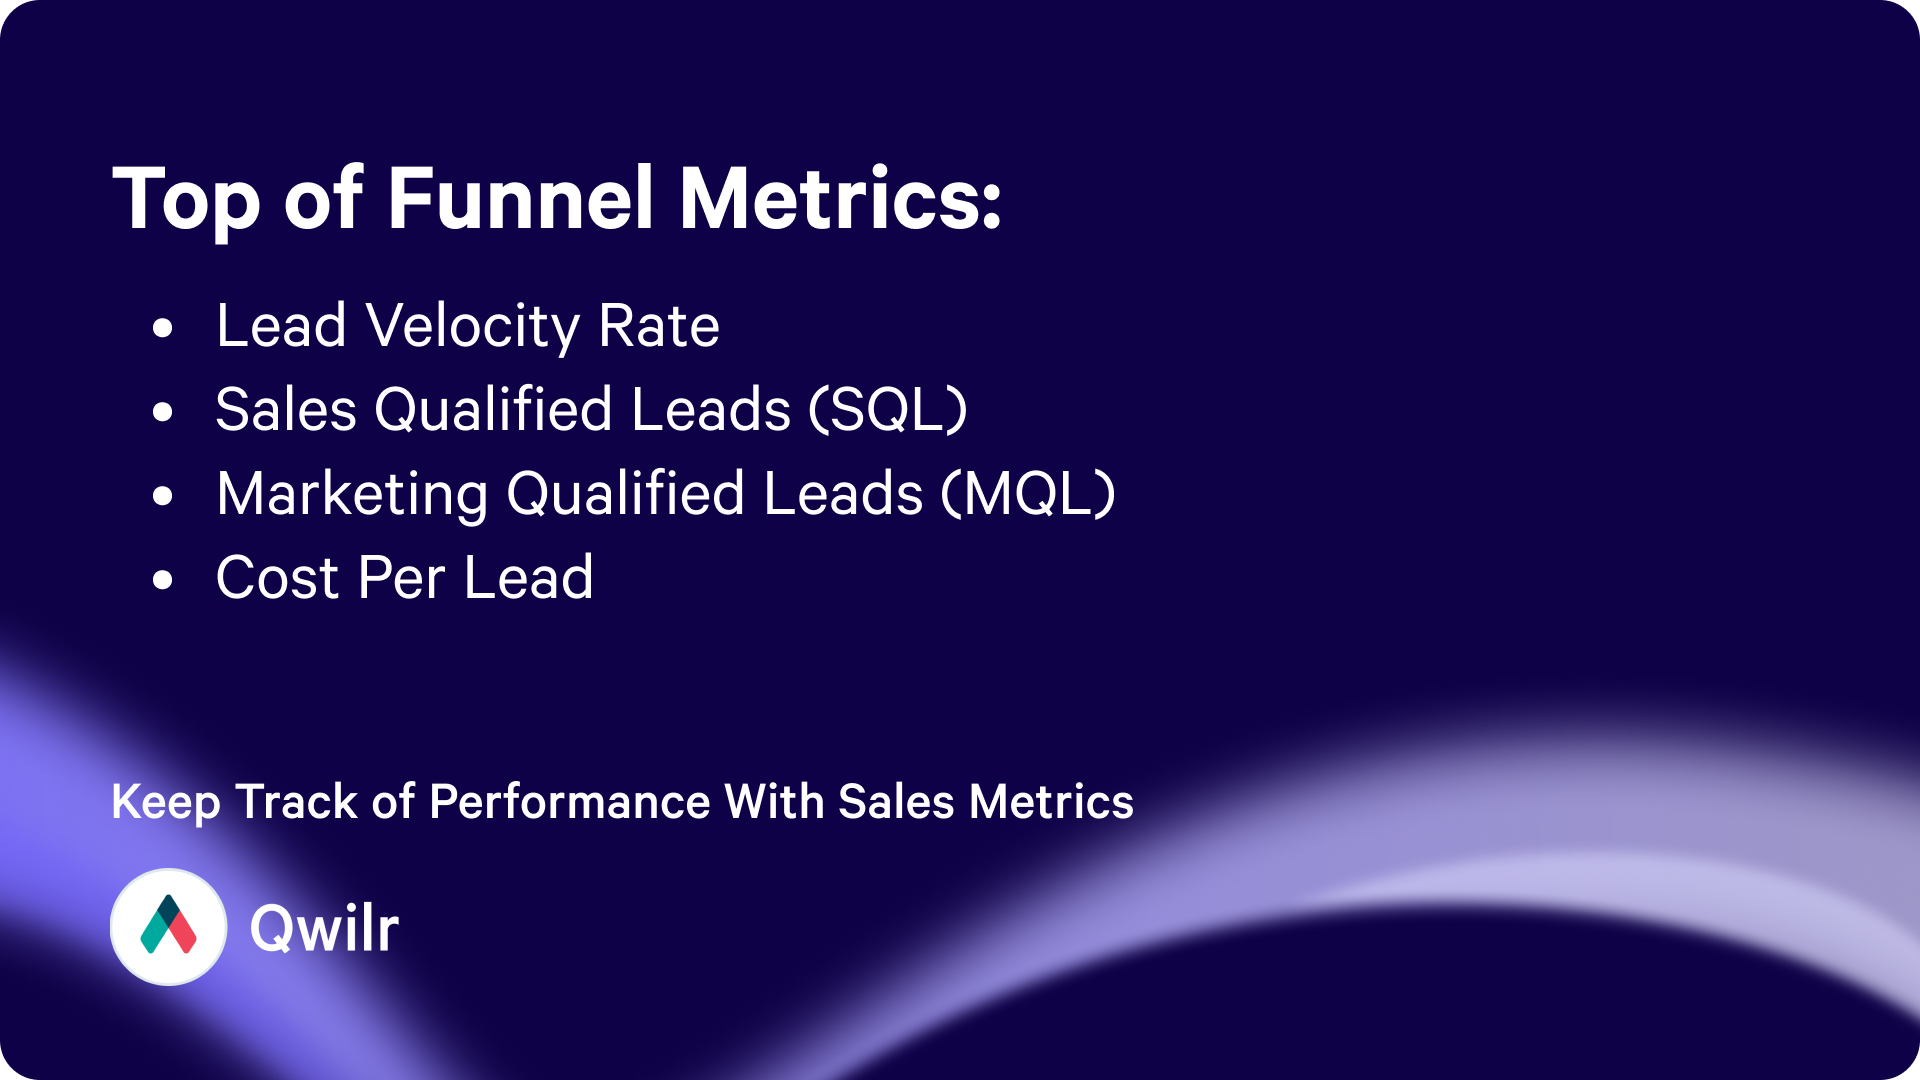 Top of funnel metrics include lead velocity, SQLs, MQLs, and cost per lead